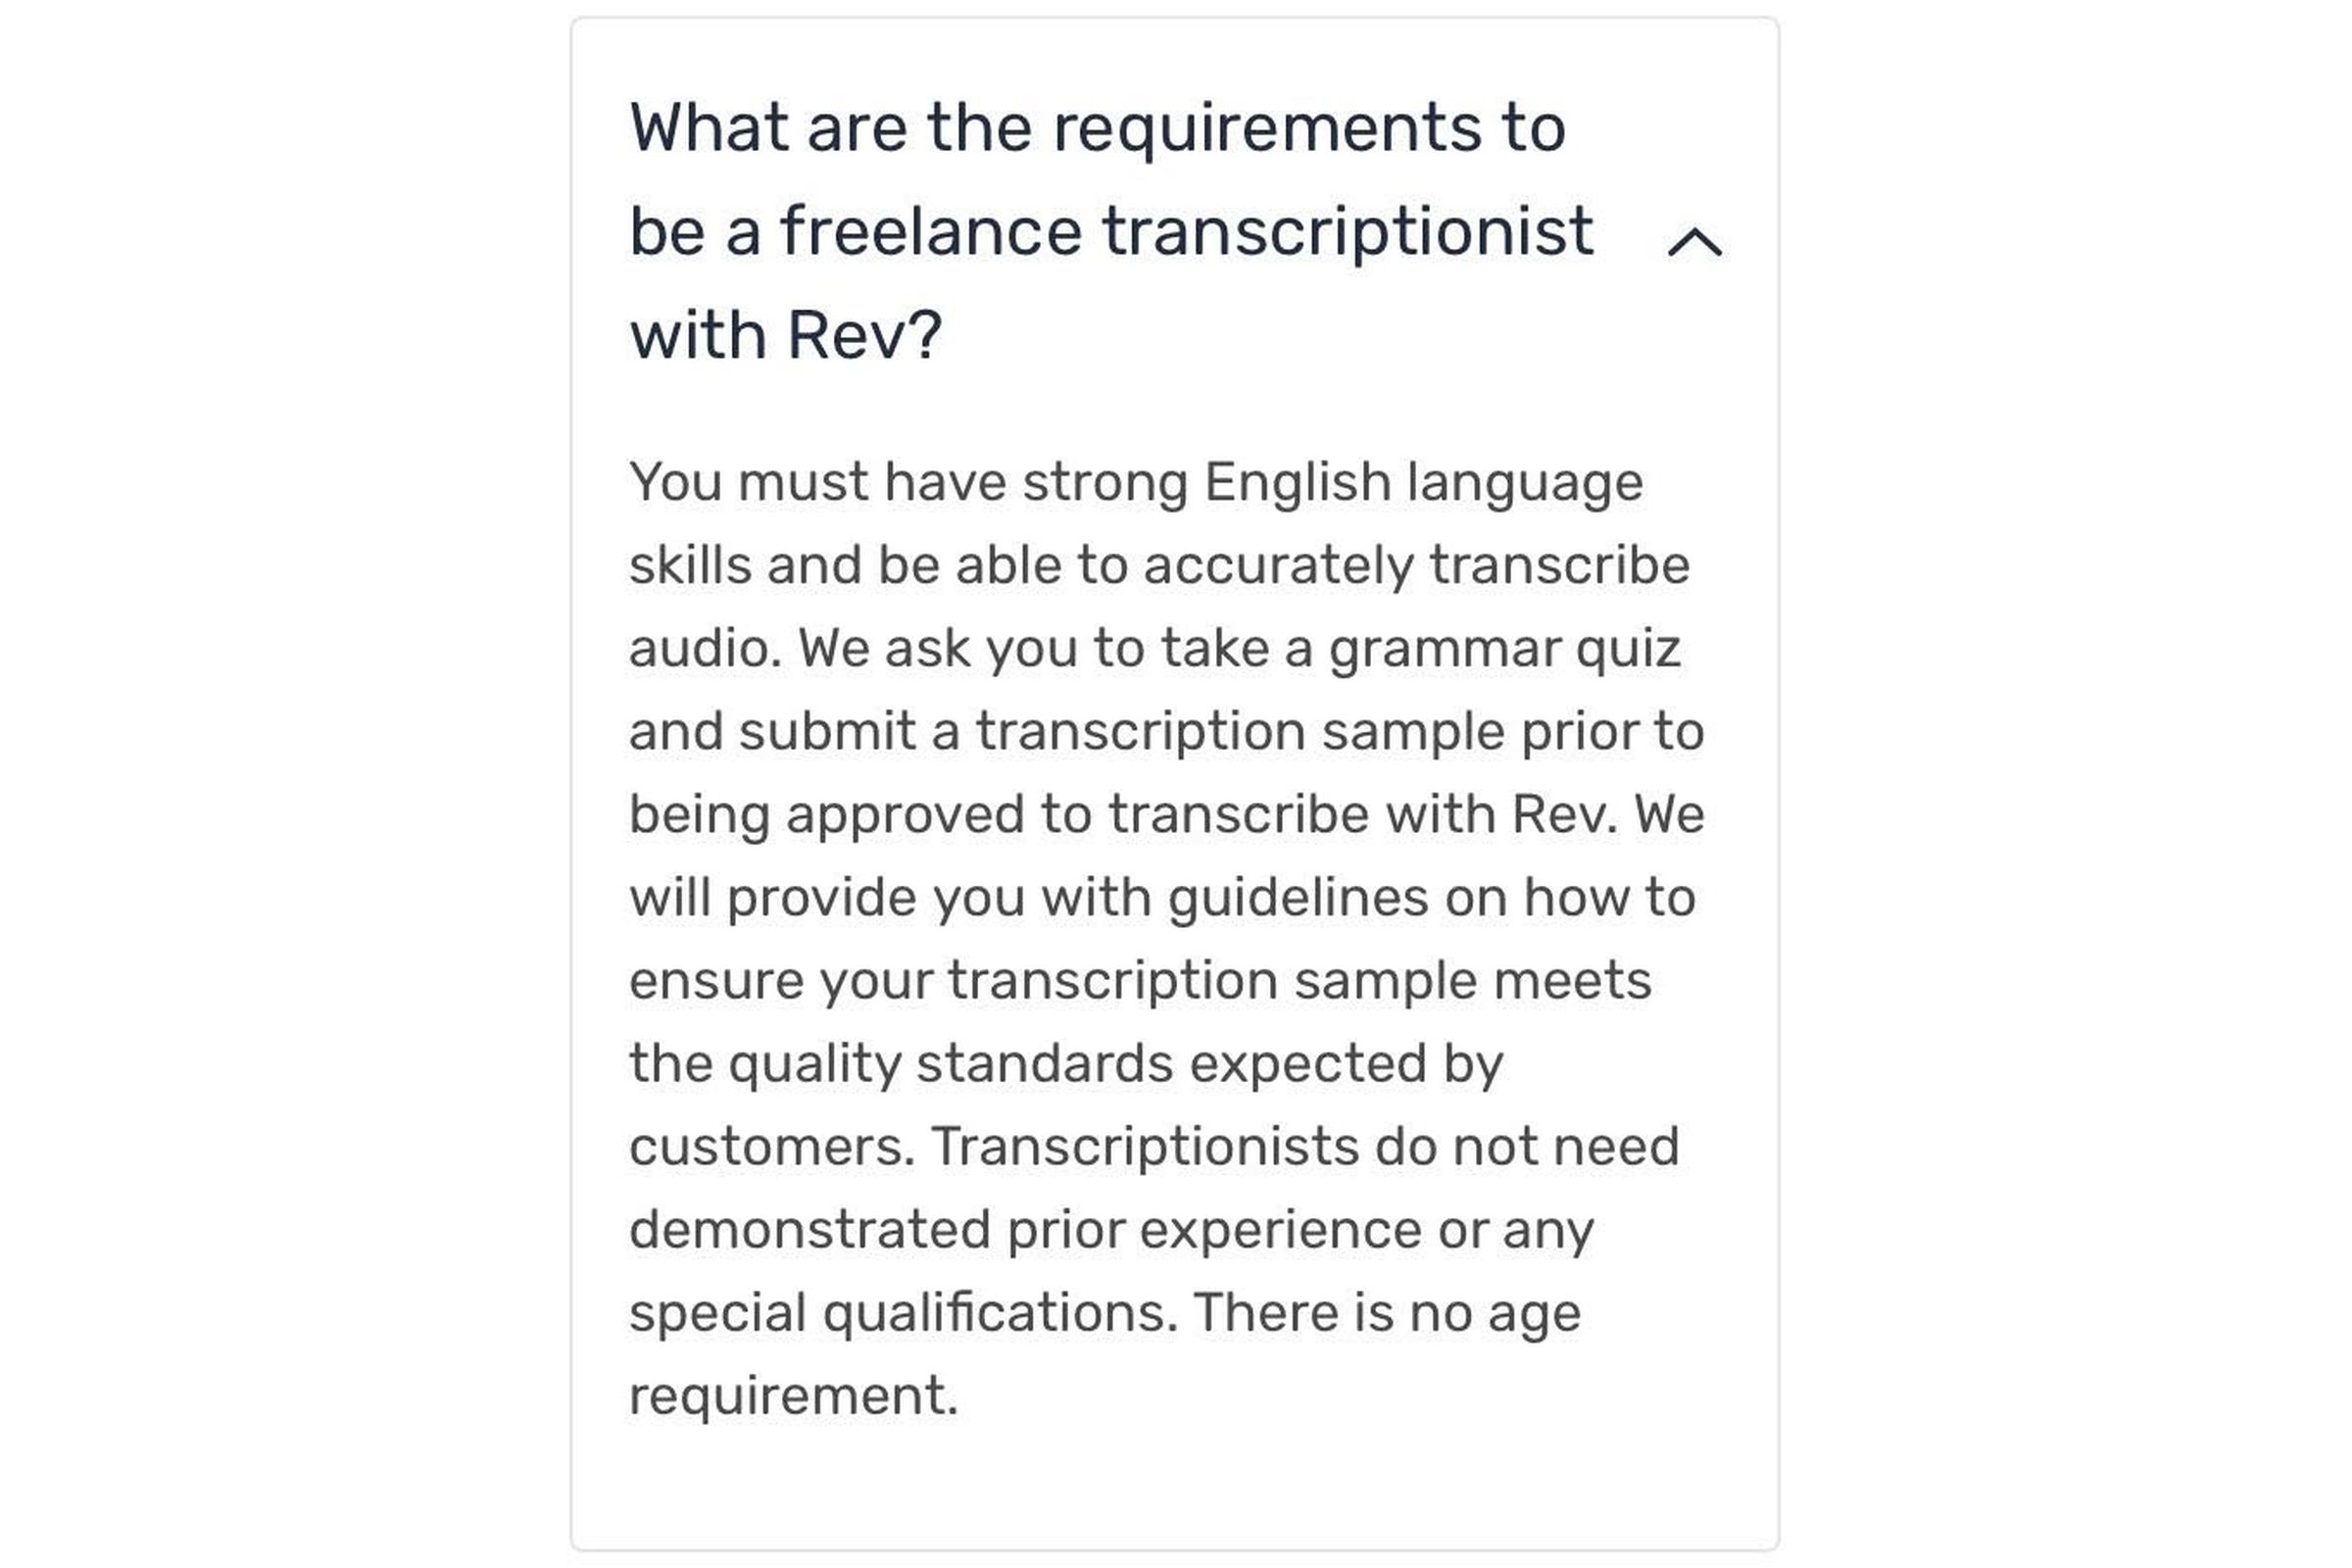 Rev’s website previously stated that “there is no age requirement” for working as a transcriptionist.